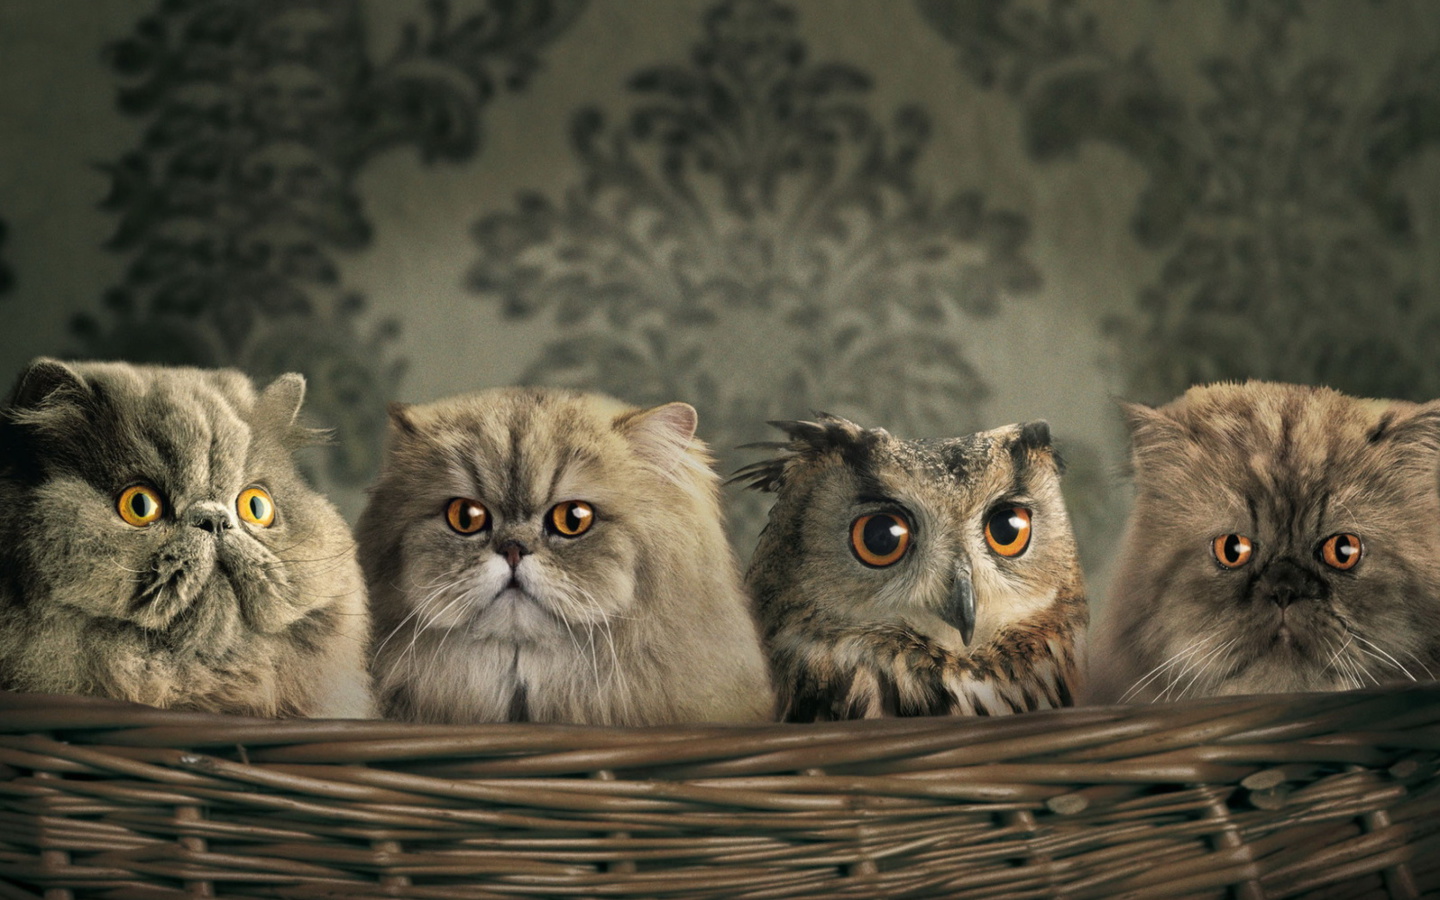 Cats and Owl as Third Wheel wallpaper 1440x900